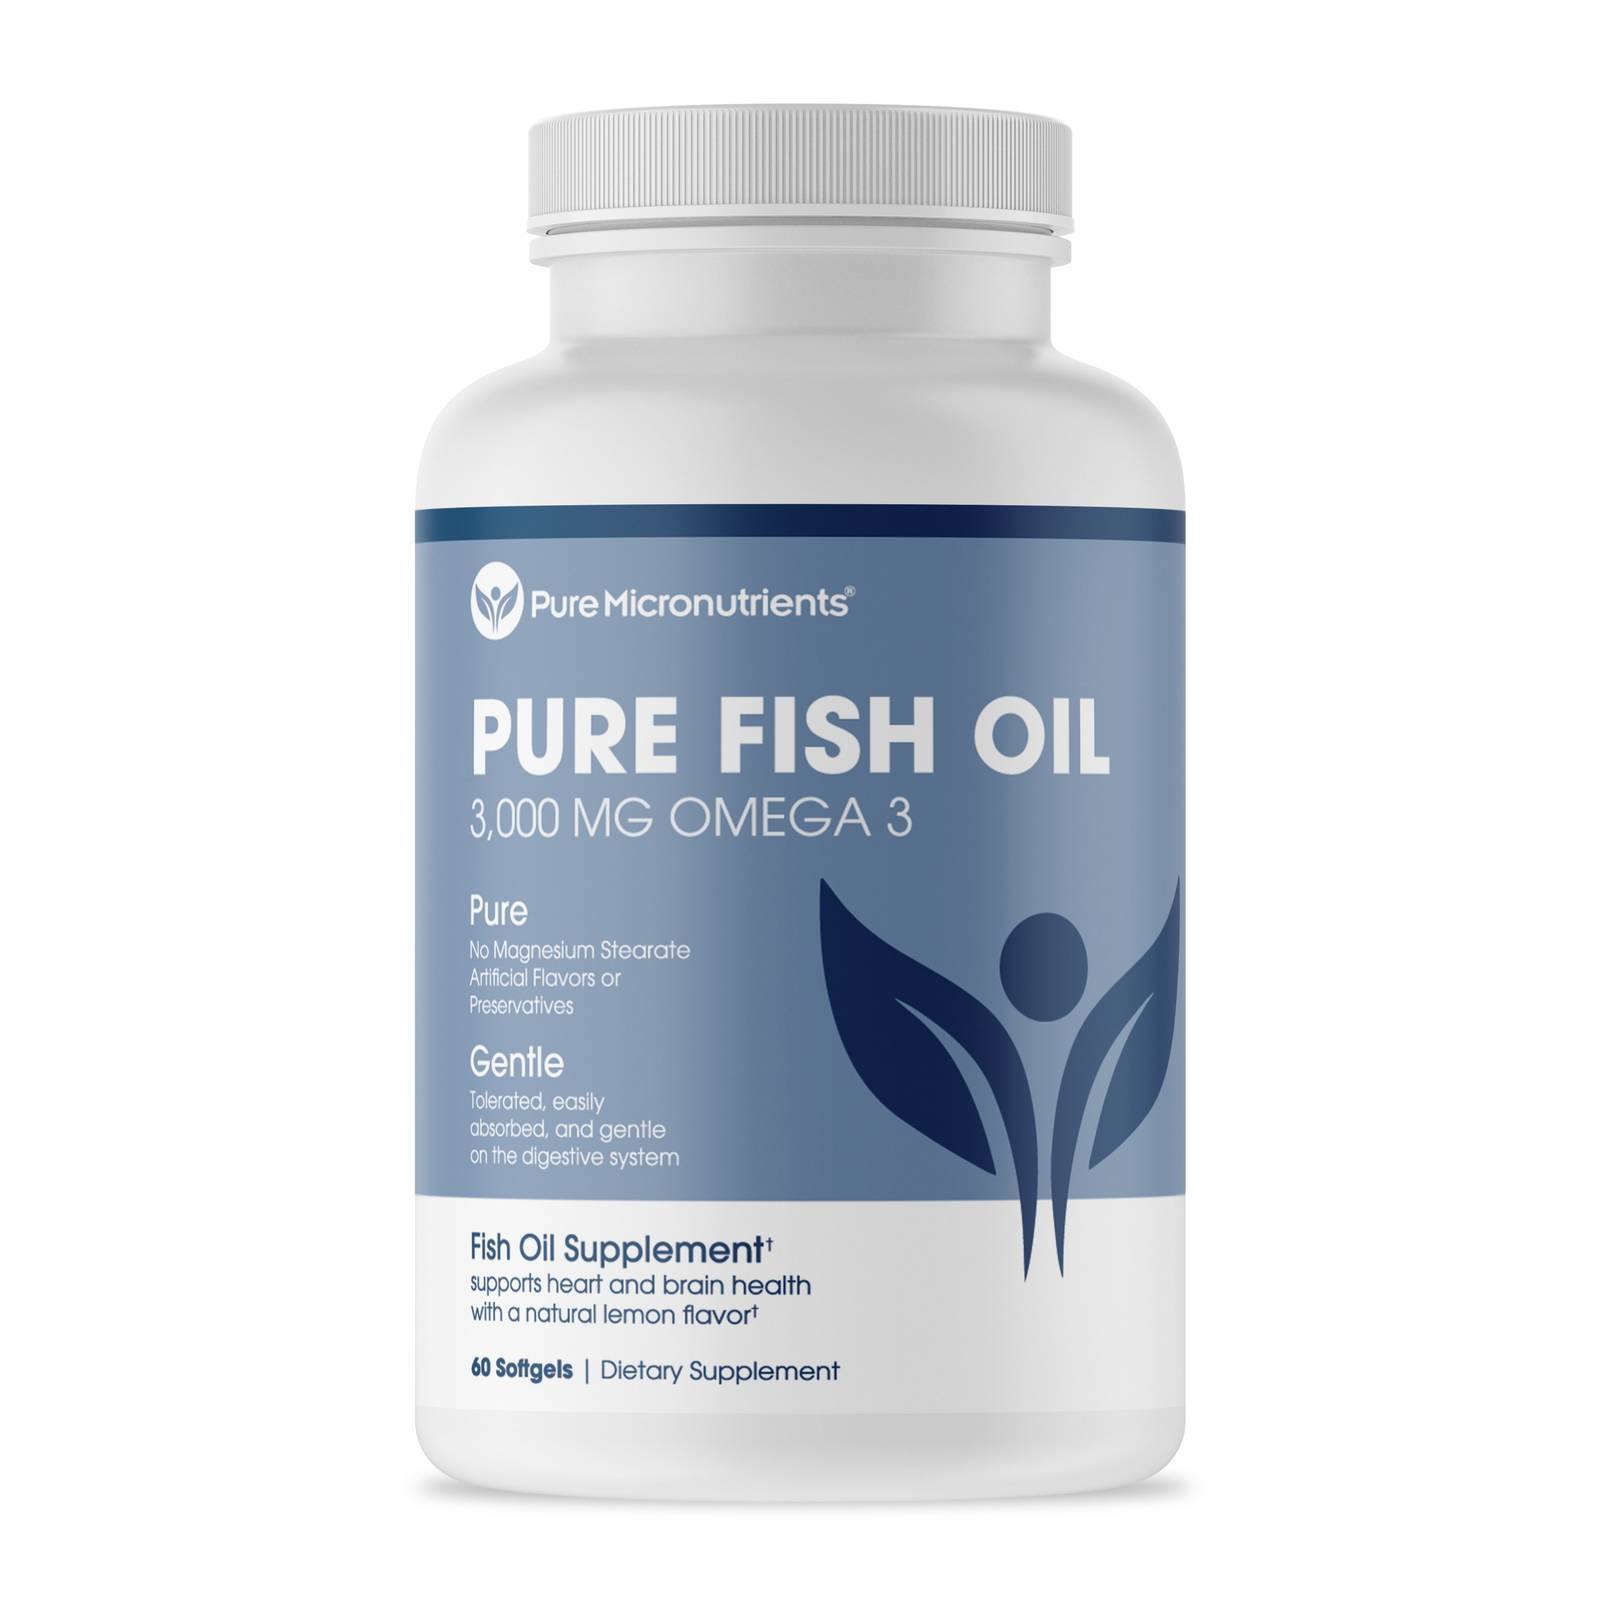 Bio Pure Max Omega 3 Supports Heart Brain And Vision